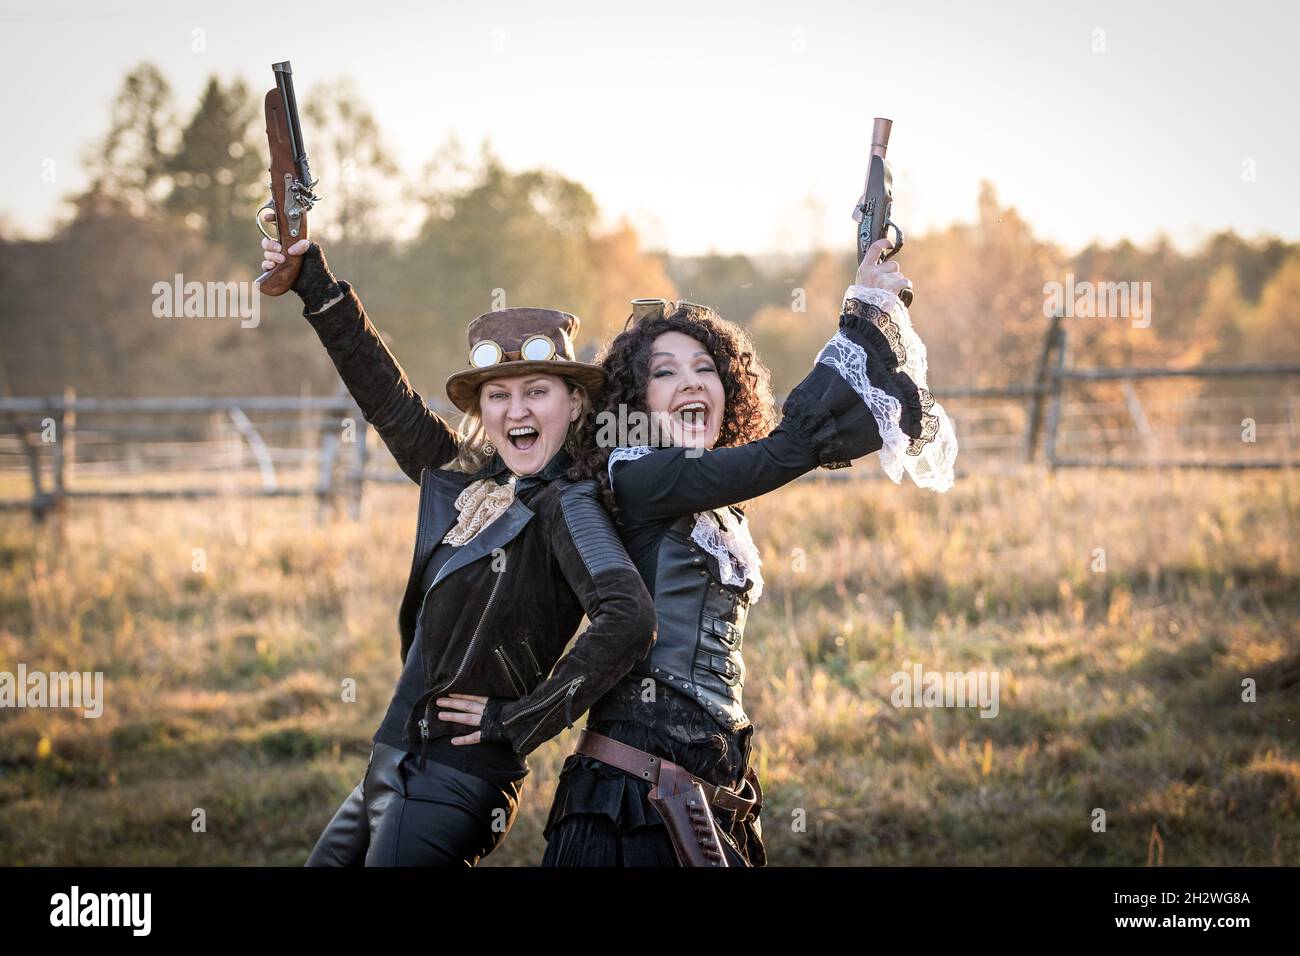 Two women in steampunk costumes with fake pistols rejoice and point gun barrels up Stock Photo